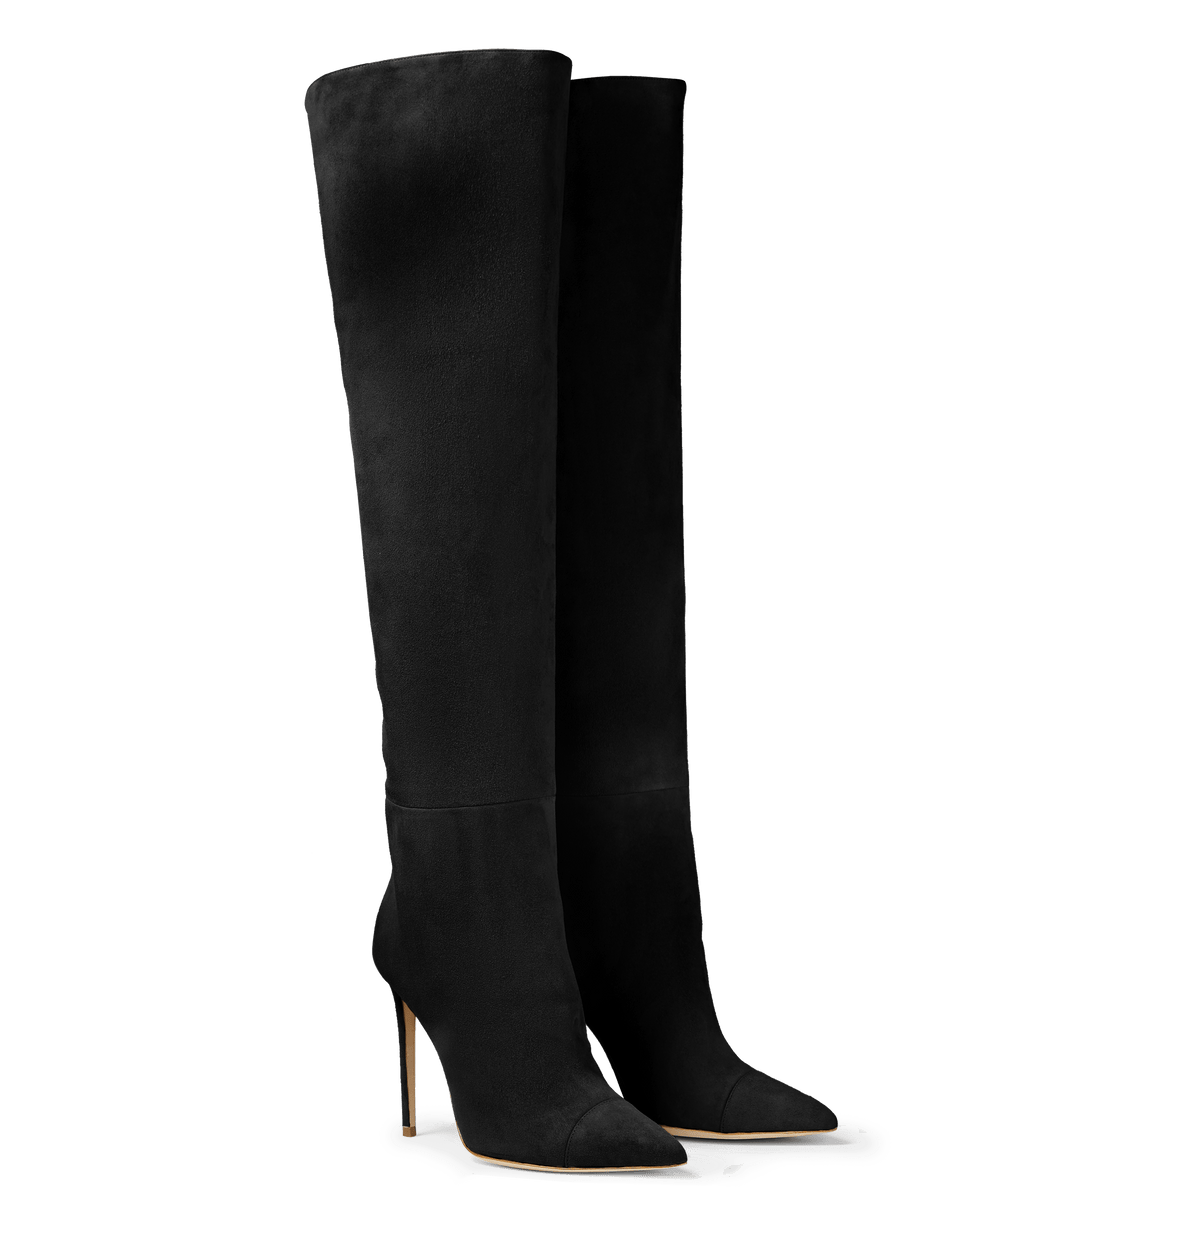 Black Suede Over the Knee Boots